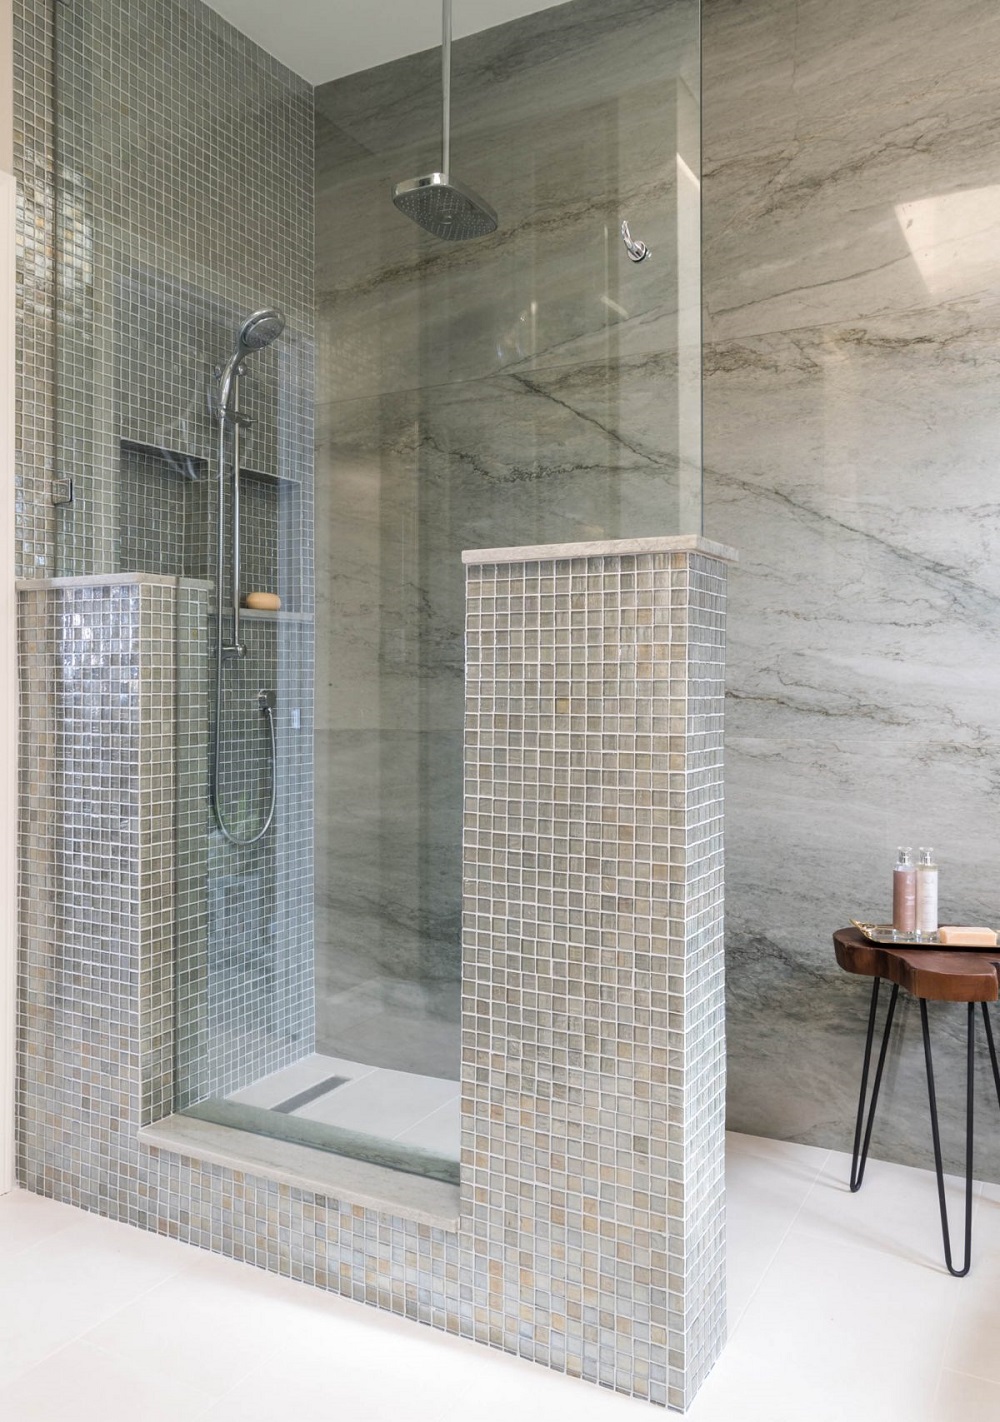 wb6 Walk-in shower ideas and tips for having one (cost, size, and more)